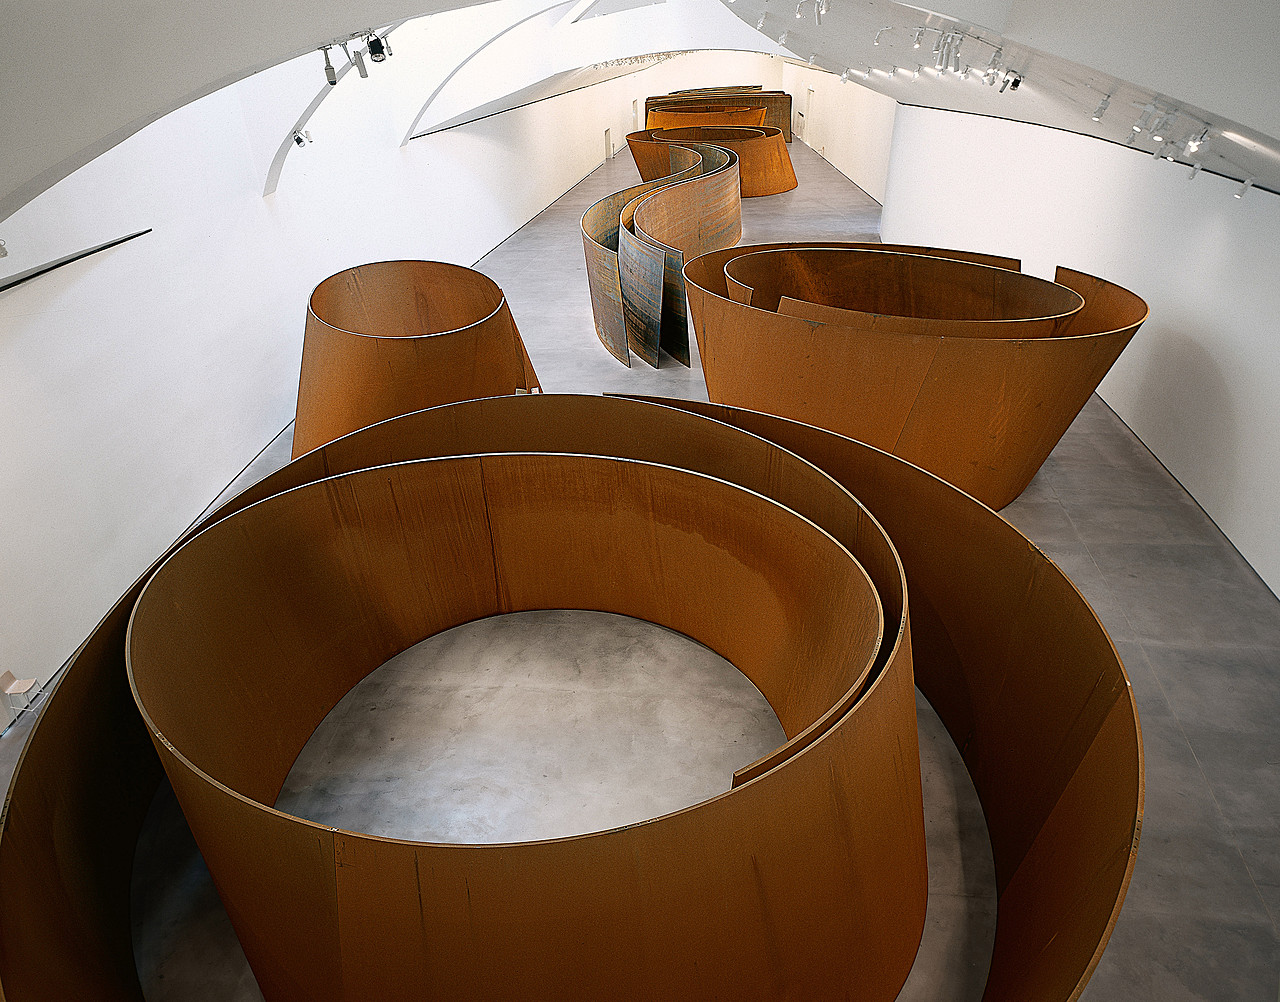 The Matter of Time | The Guggenheim Museums and Foundation